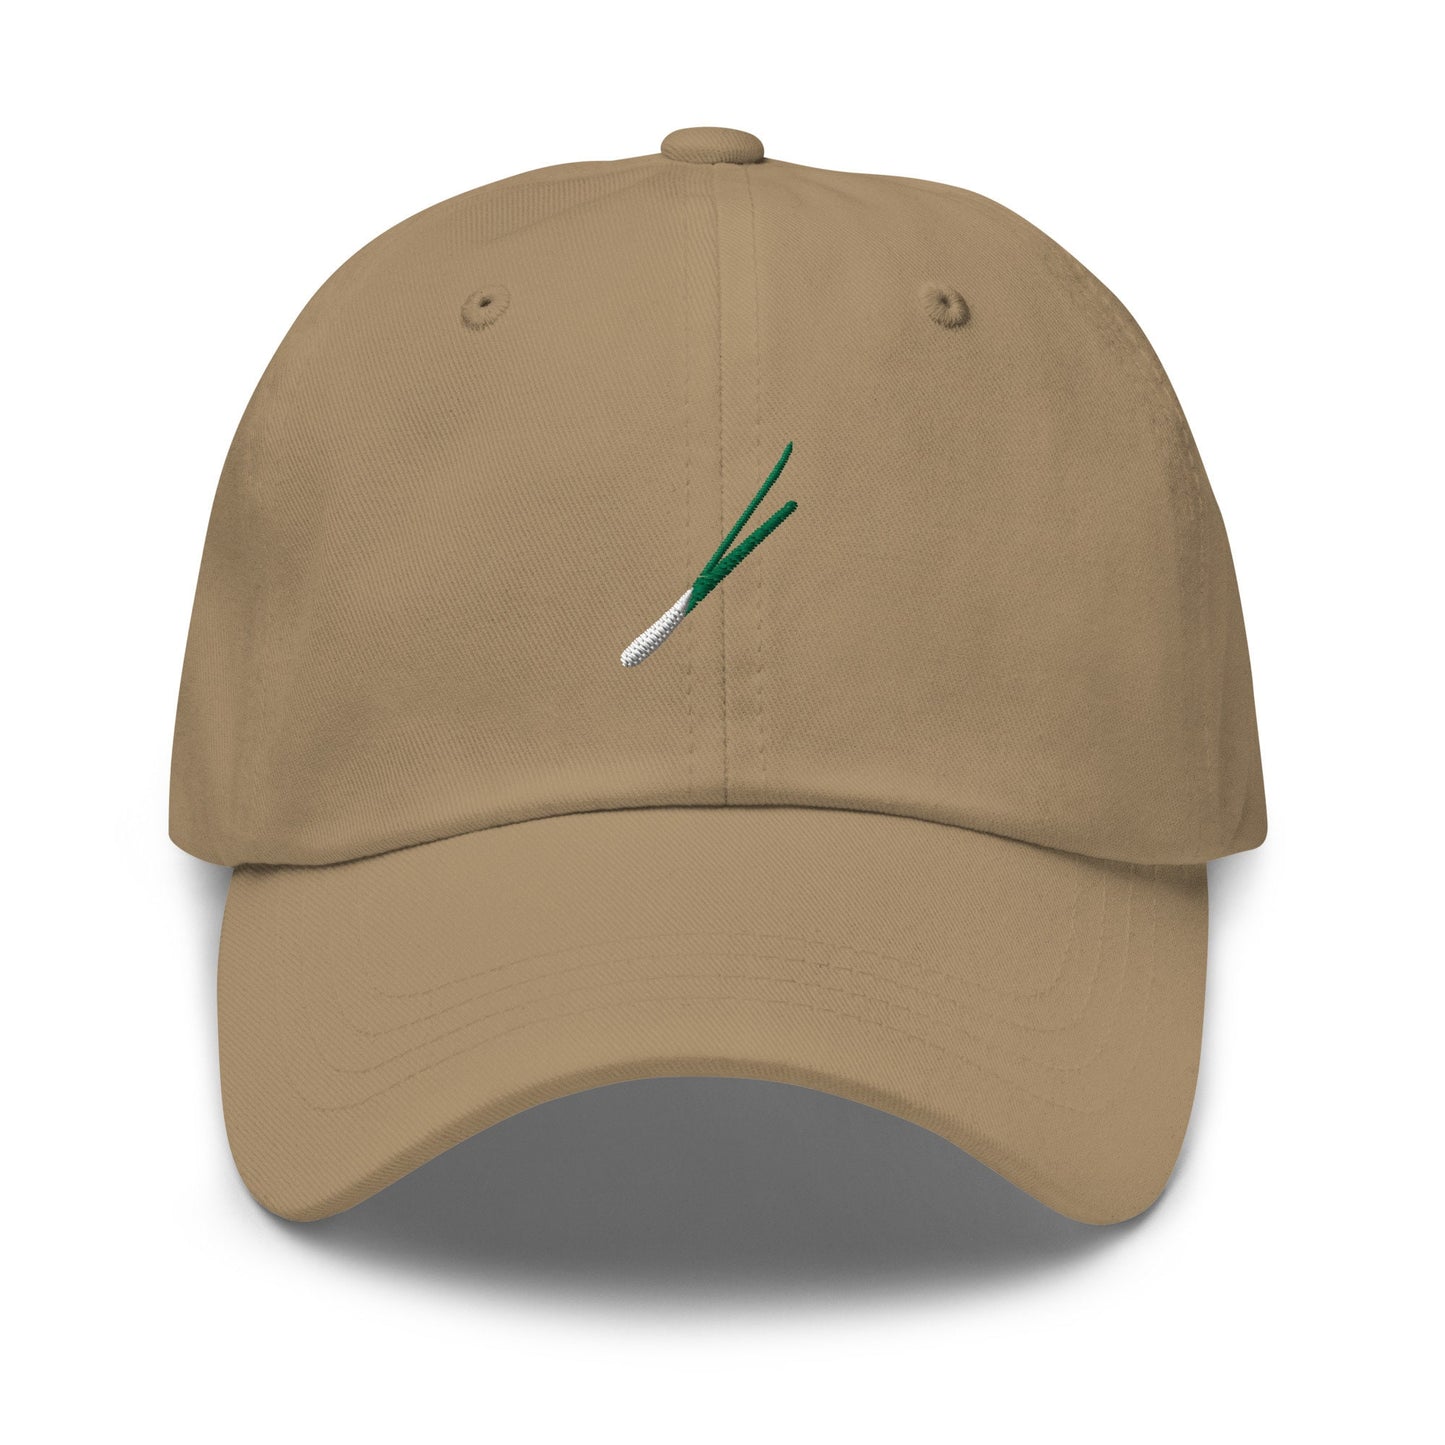 Green Onion Hat - Scallion - Foodie Gift - Multiple Colors - Cotton Embroidered Cap